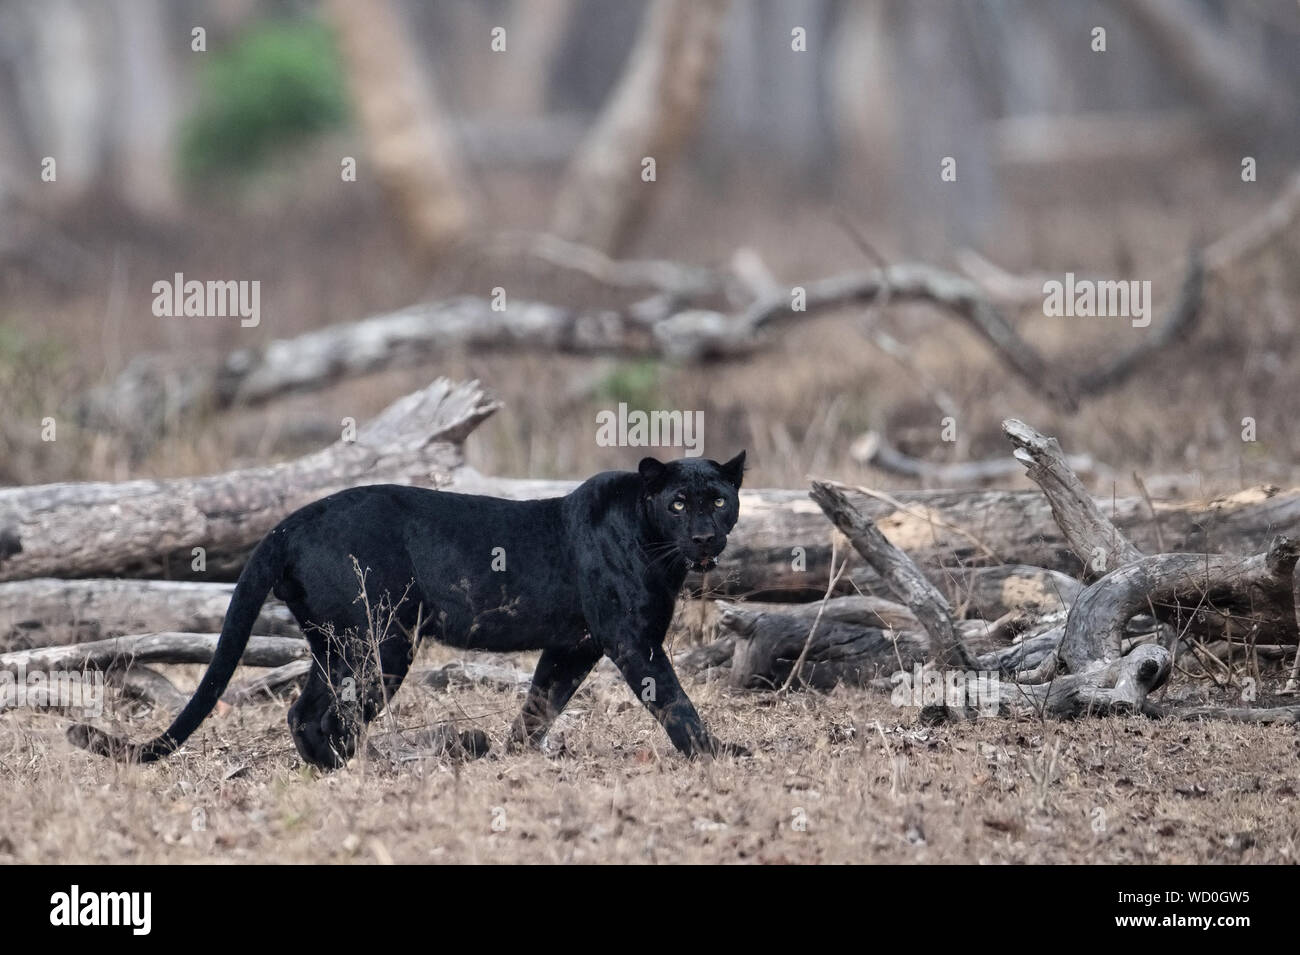 Portrait Of Black Panther Walking On Field In Forest Stock Photo - Alamy